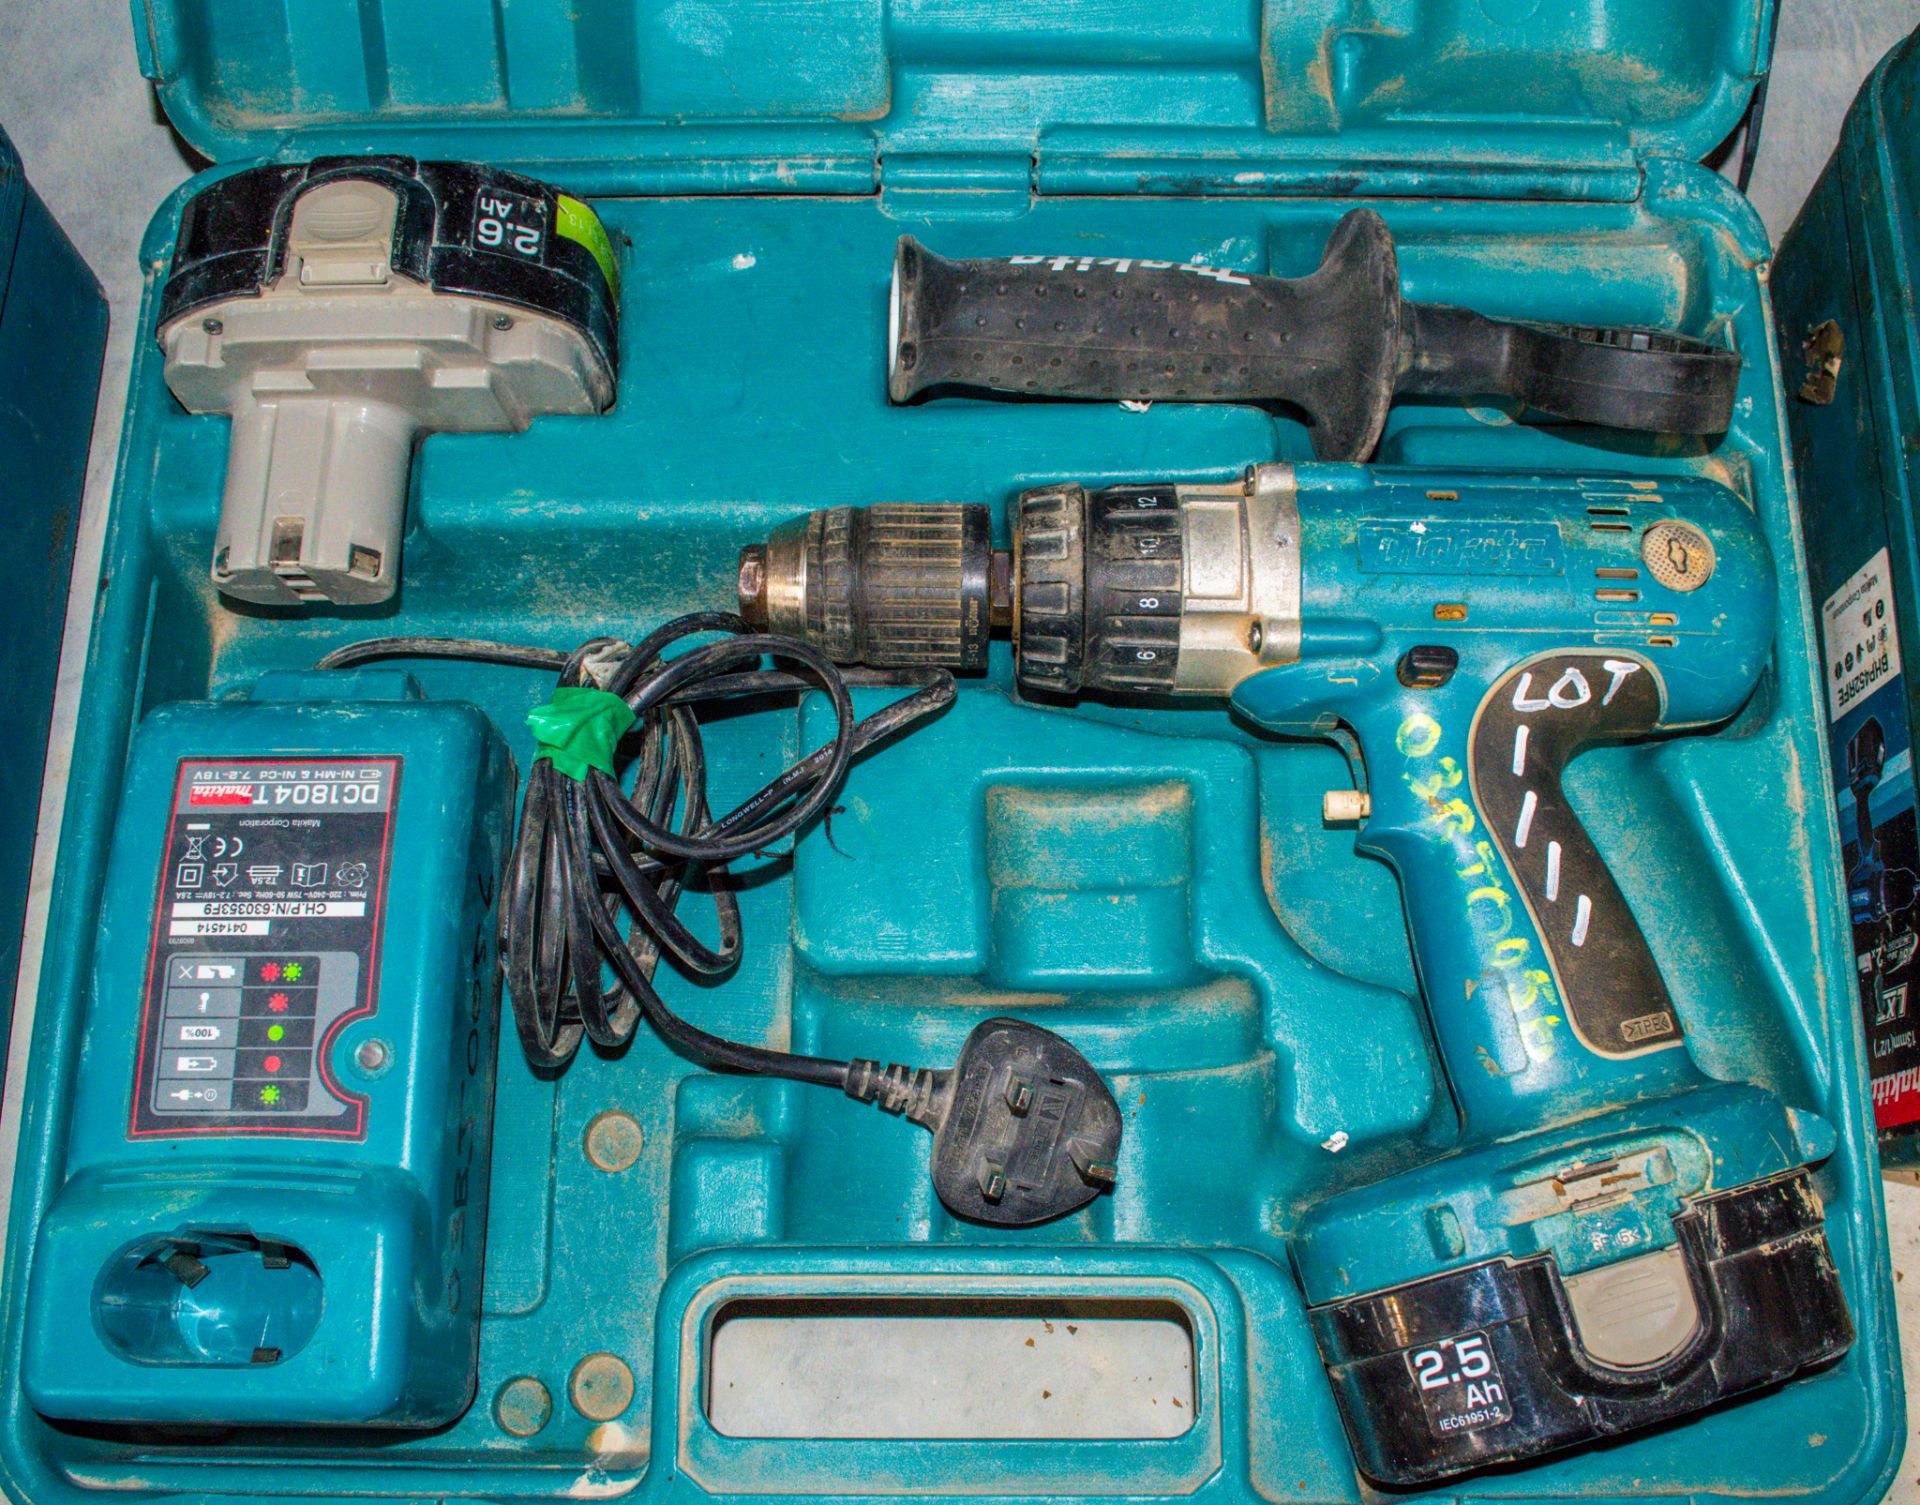 Makita 18v cordless drill c/w 2 batteries, charger & carry case 03RT0056